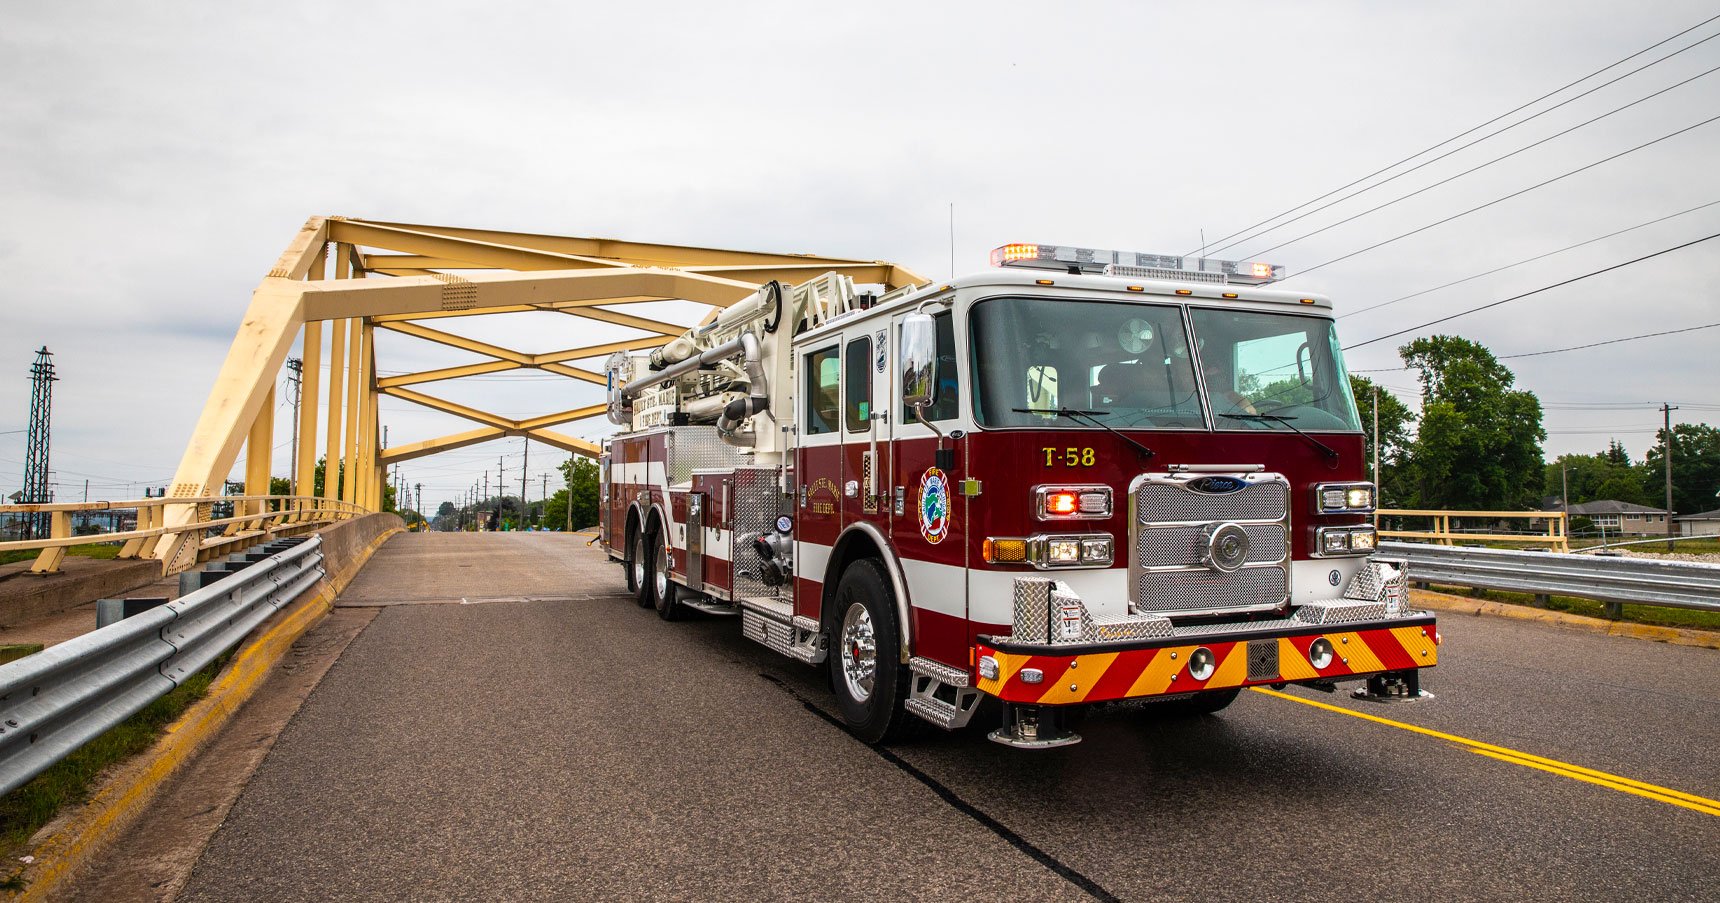 A red and white aerial fire truck designed for urban fires drives under a yellow steel bridge on an asphalt road.